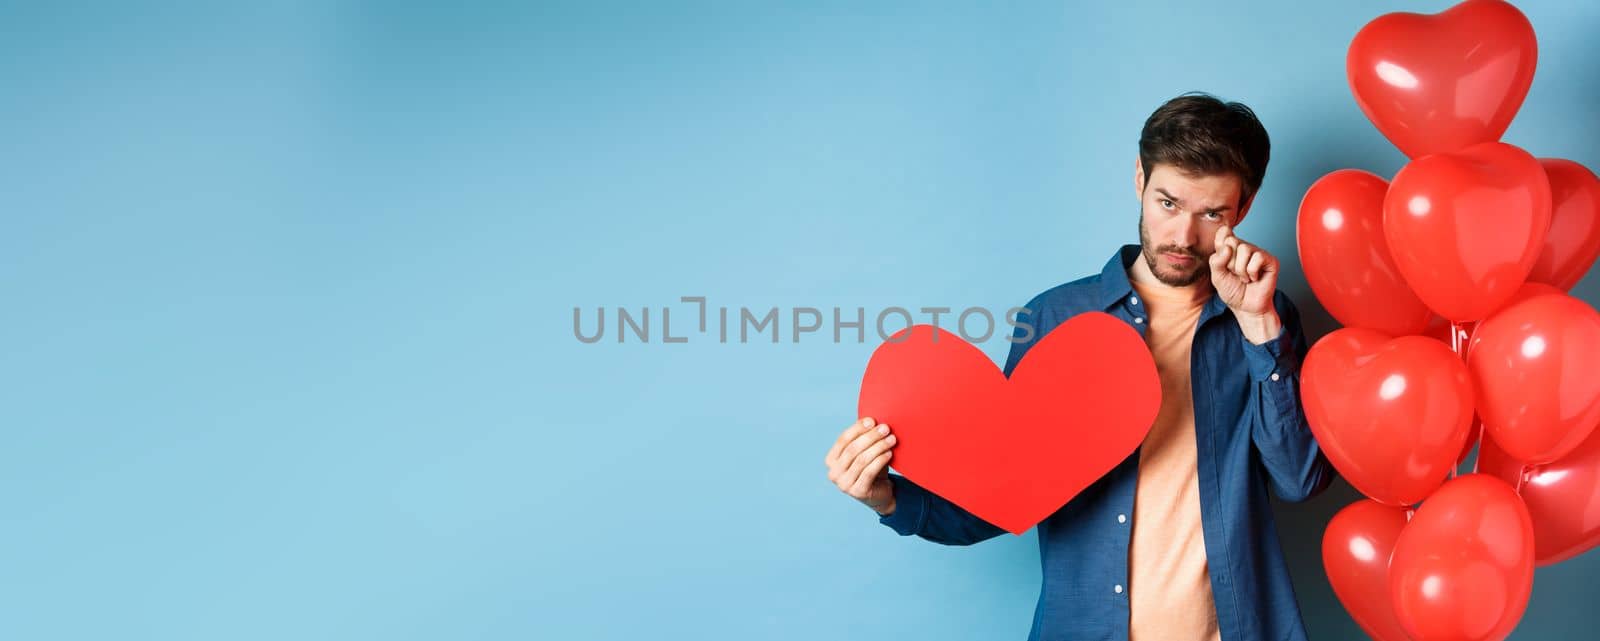 Sad and heartbroken man crying, wiping tears, standing with red heart and balloons, breakup on Valentines day, blue background.